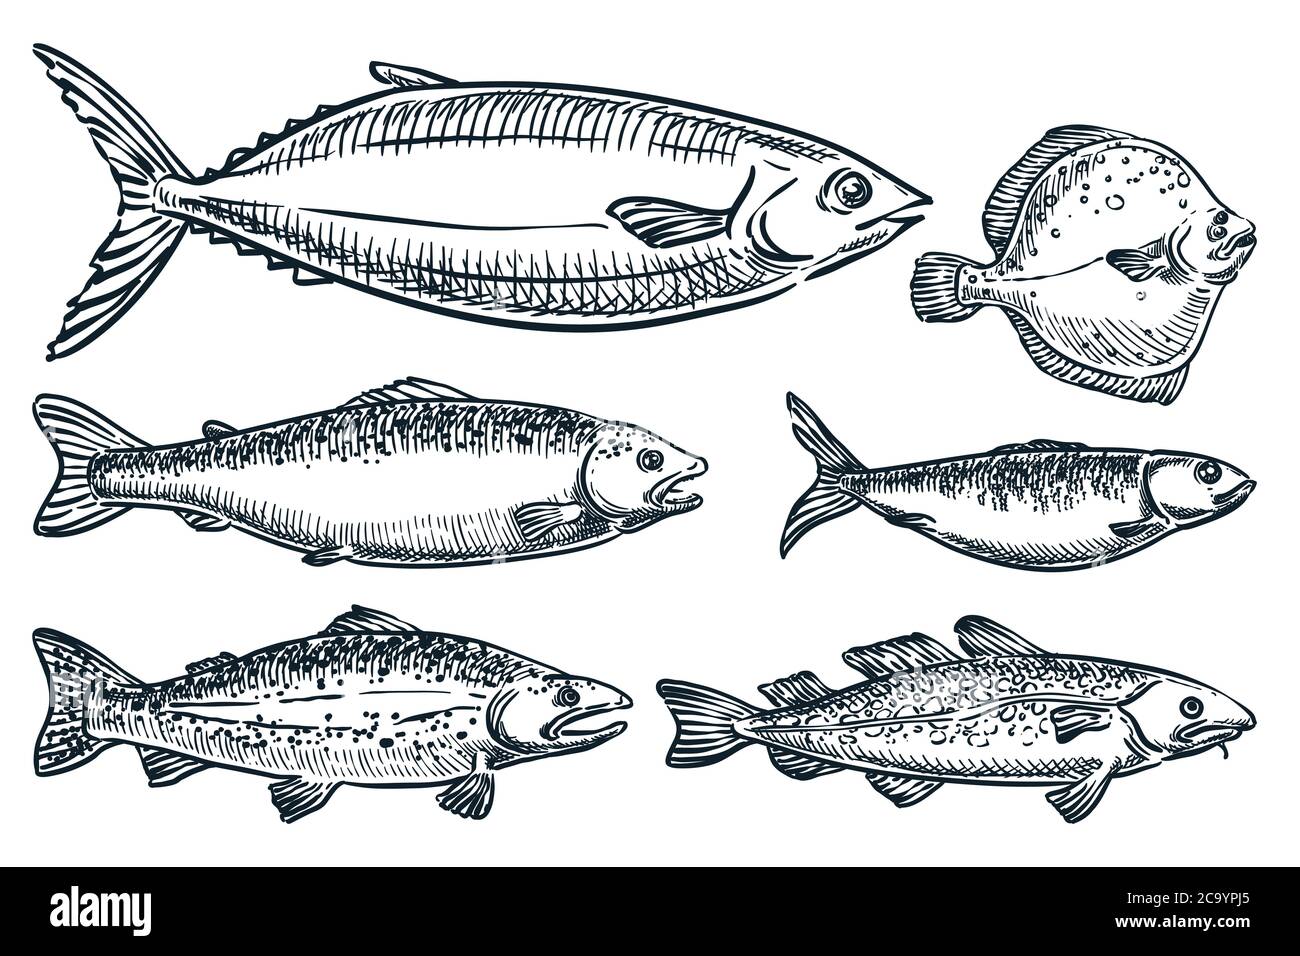 Sea fishes set, isolated on white background. Hand drawn sketch vector illustration. Seafood market food design elements. Doodle drawing of salmon, tr Stock Vector